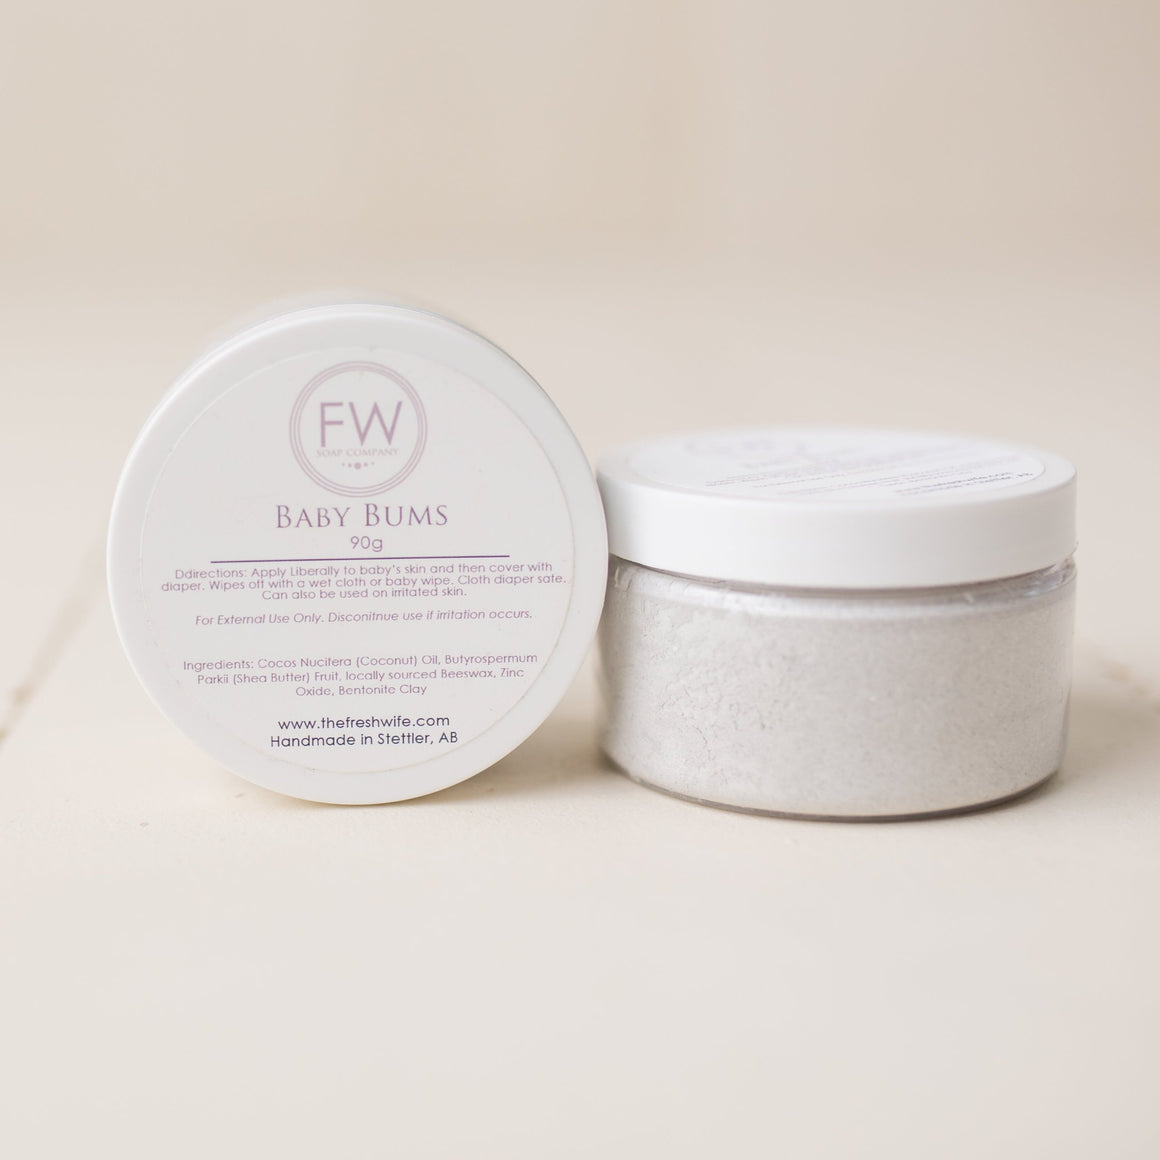 Fresh Wife Baby Bums diaper cream made with all natural ingredients.  Sold in an 120ml plastic jar.  